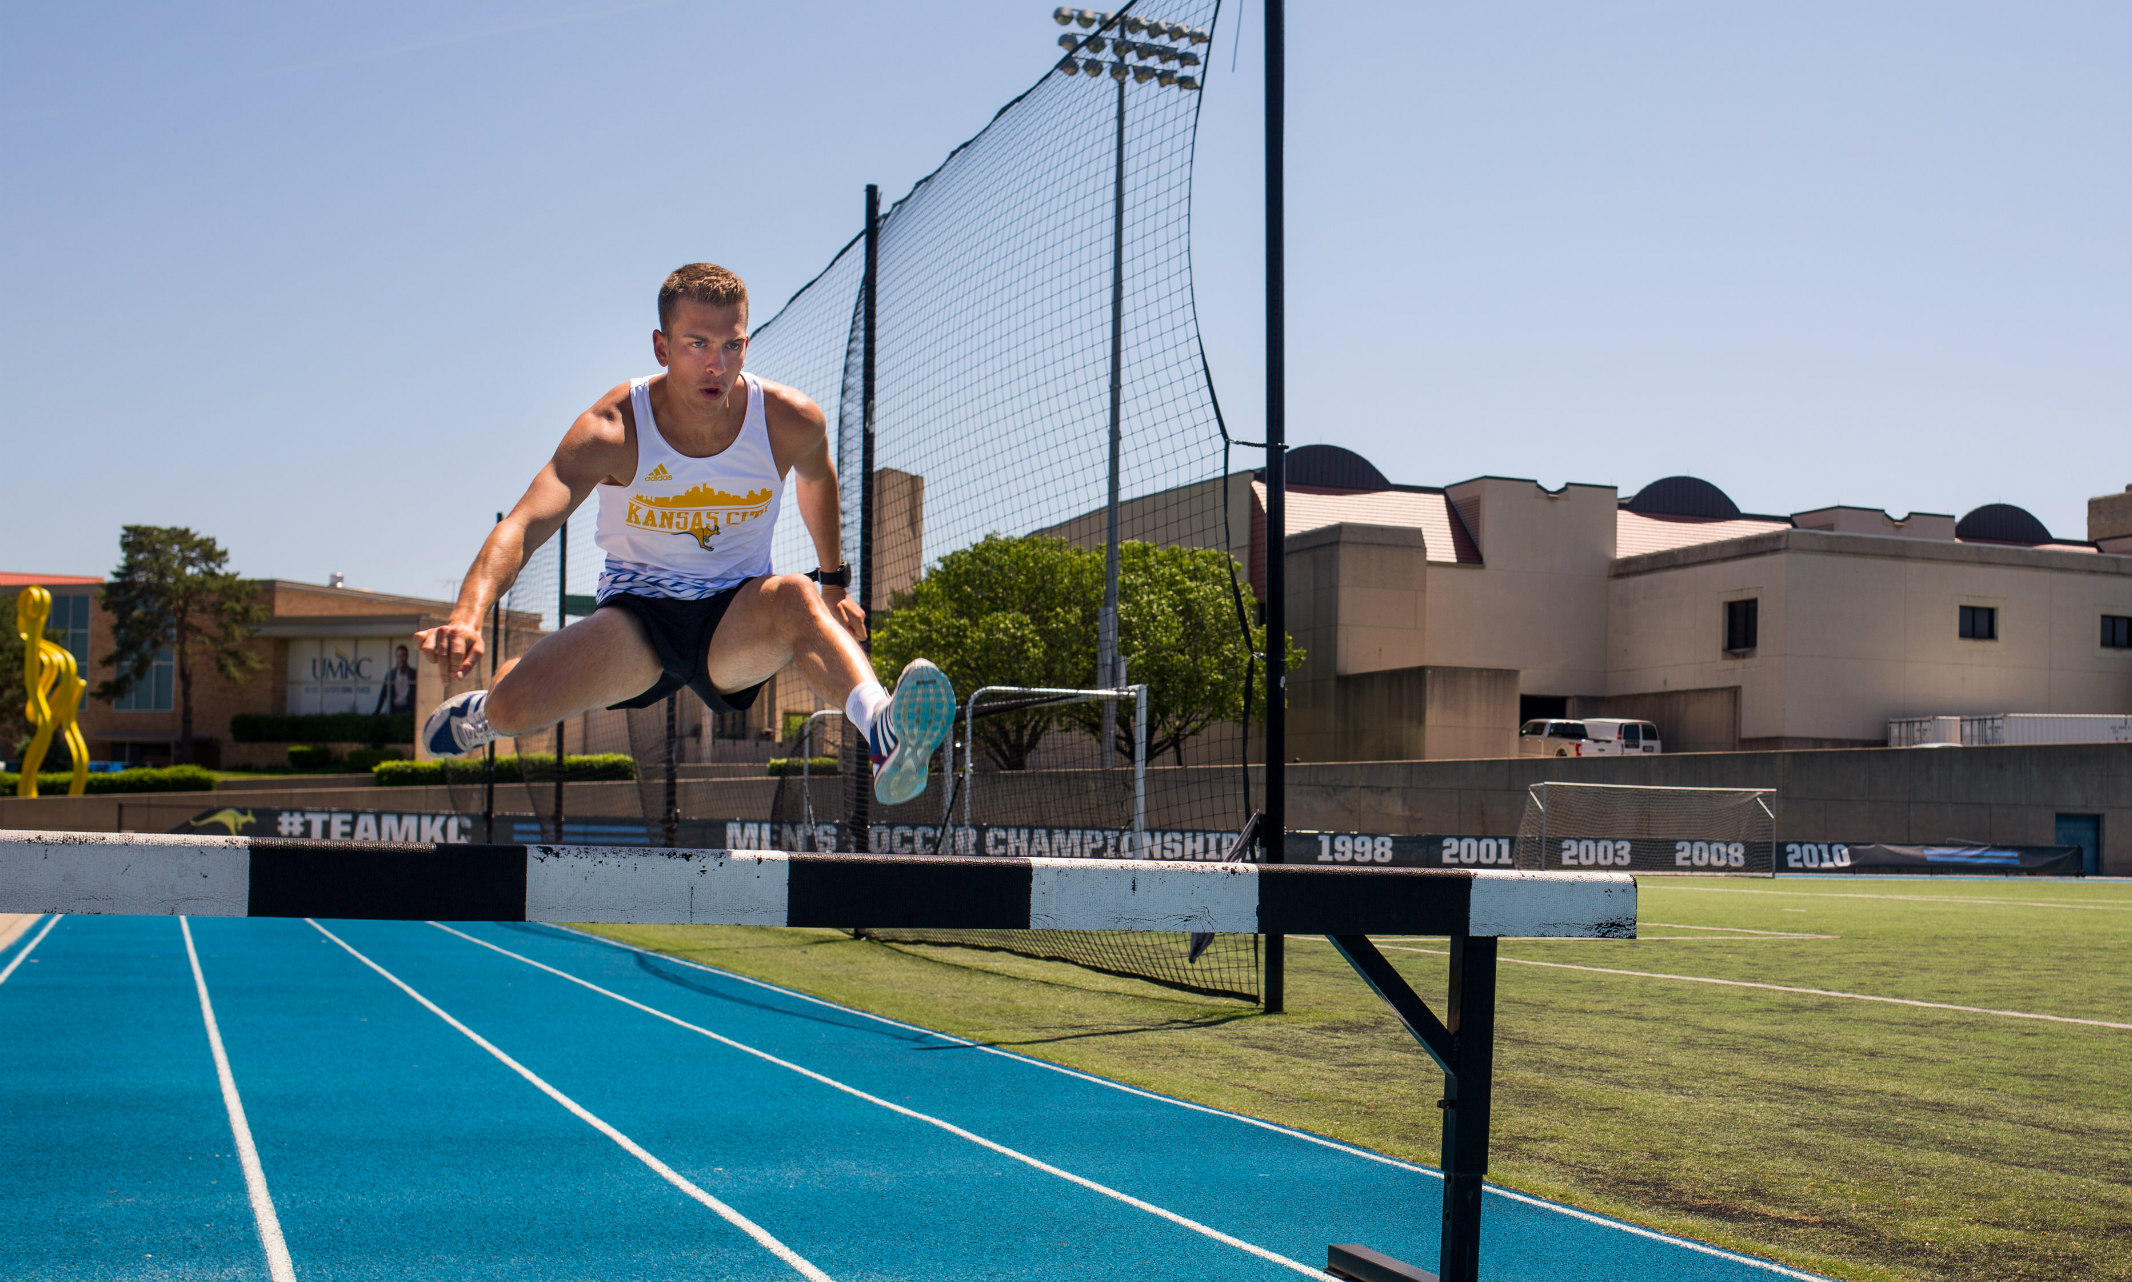 Bryce Miller jumps over a hurdle on the track